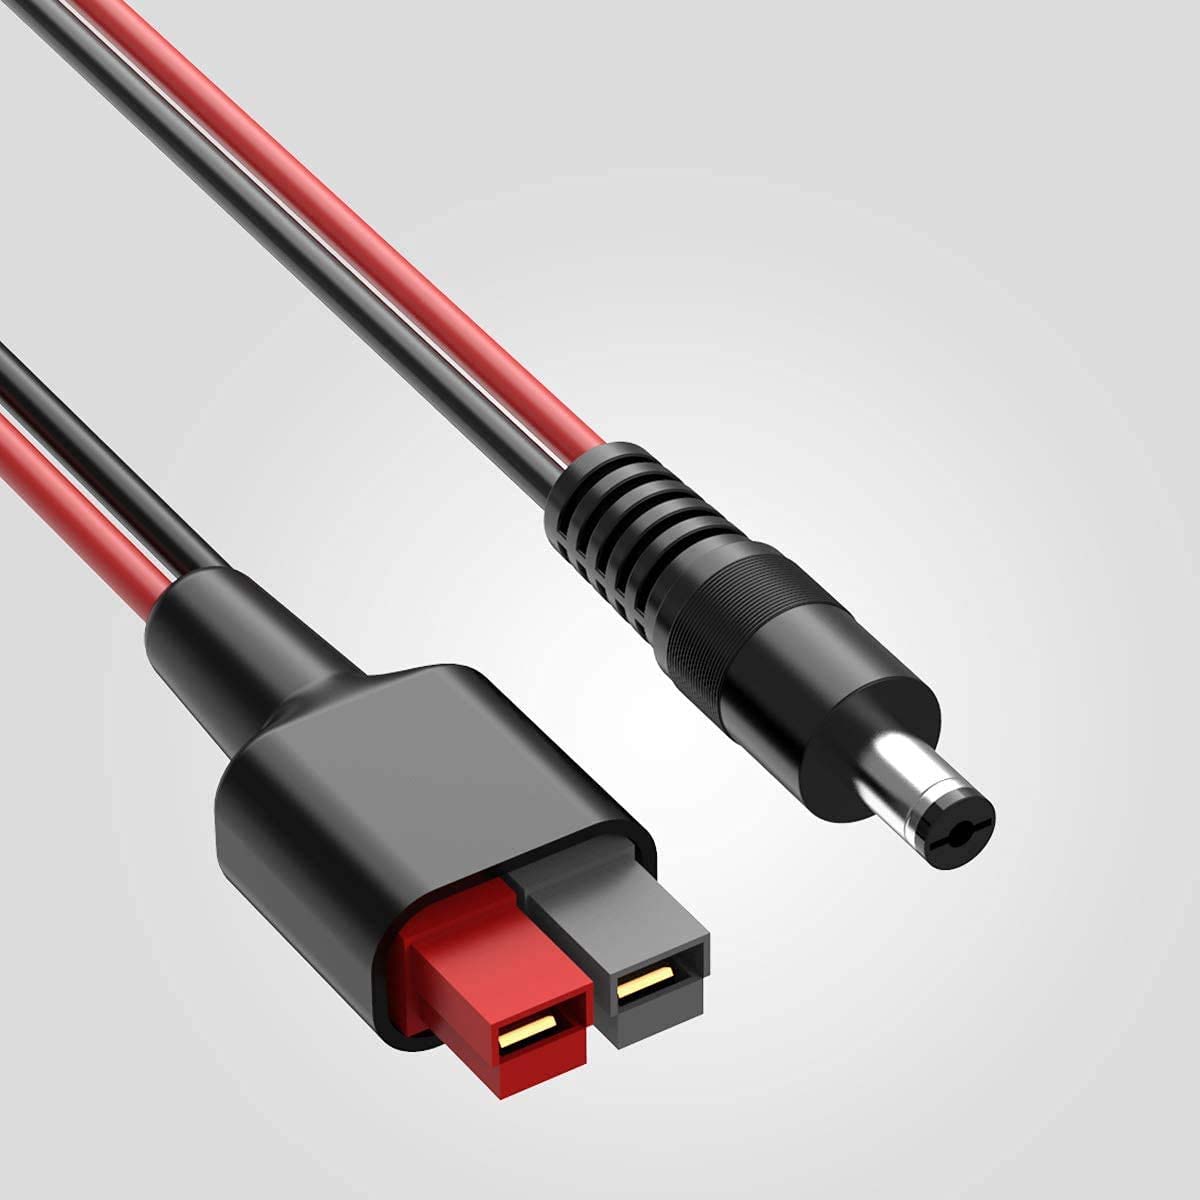 ALLPOWERS DC5525 (5.5mm x 2.5mm) to Anderson connector adapter cable